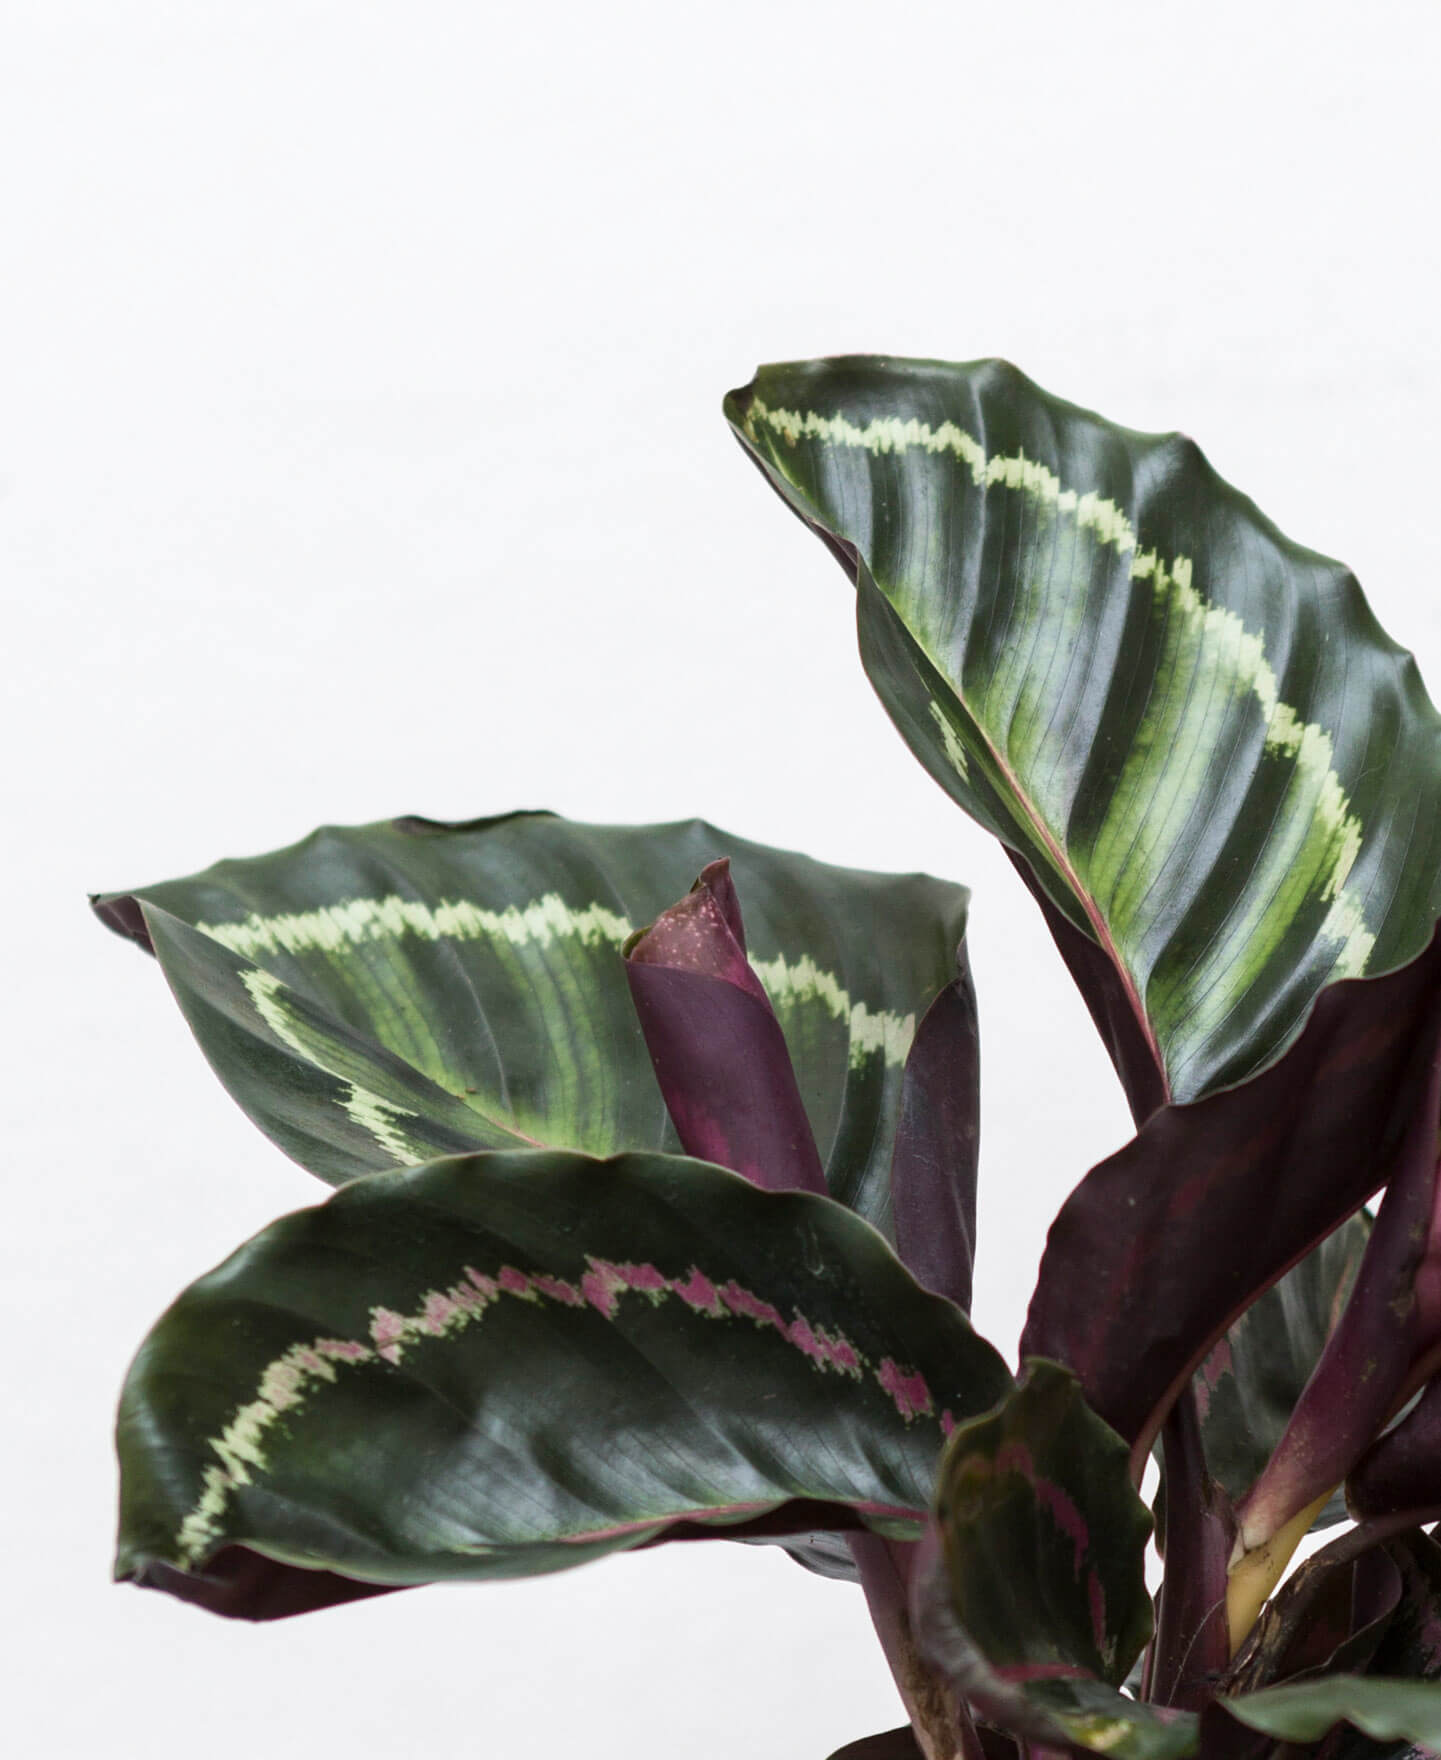 Why are My Calathea Leaves Curling? 